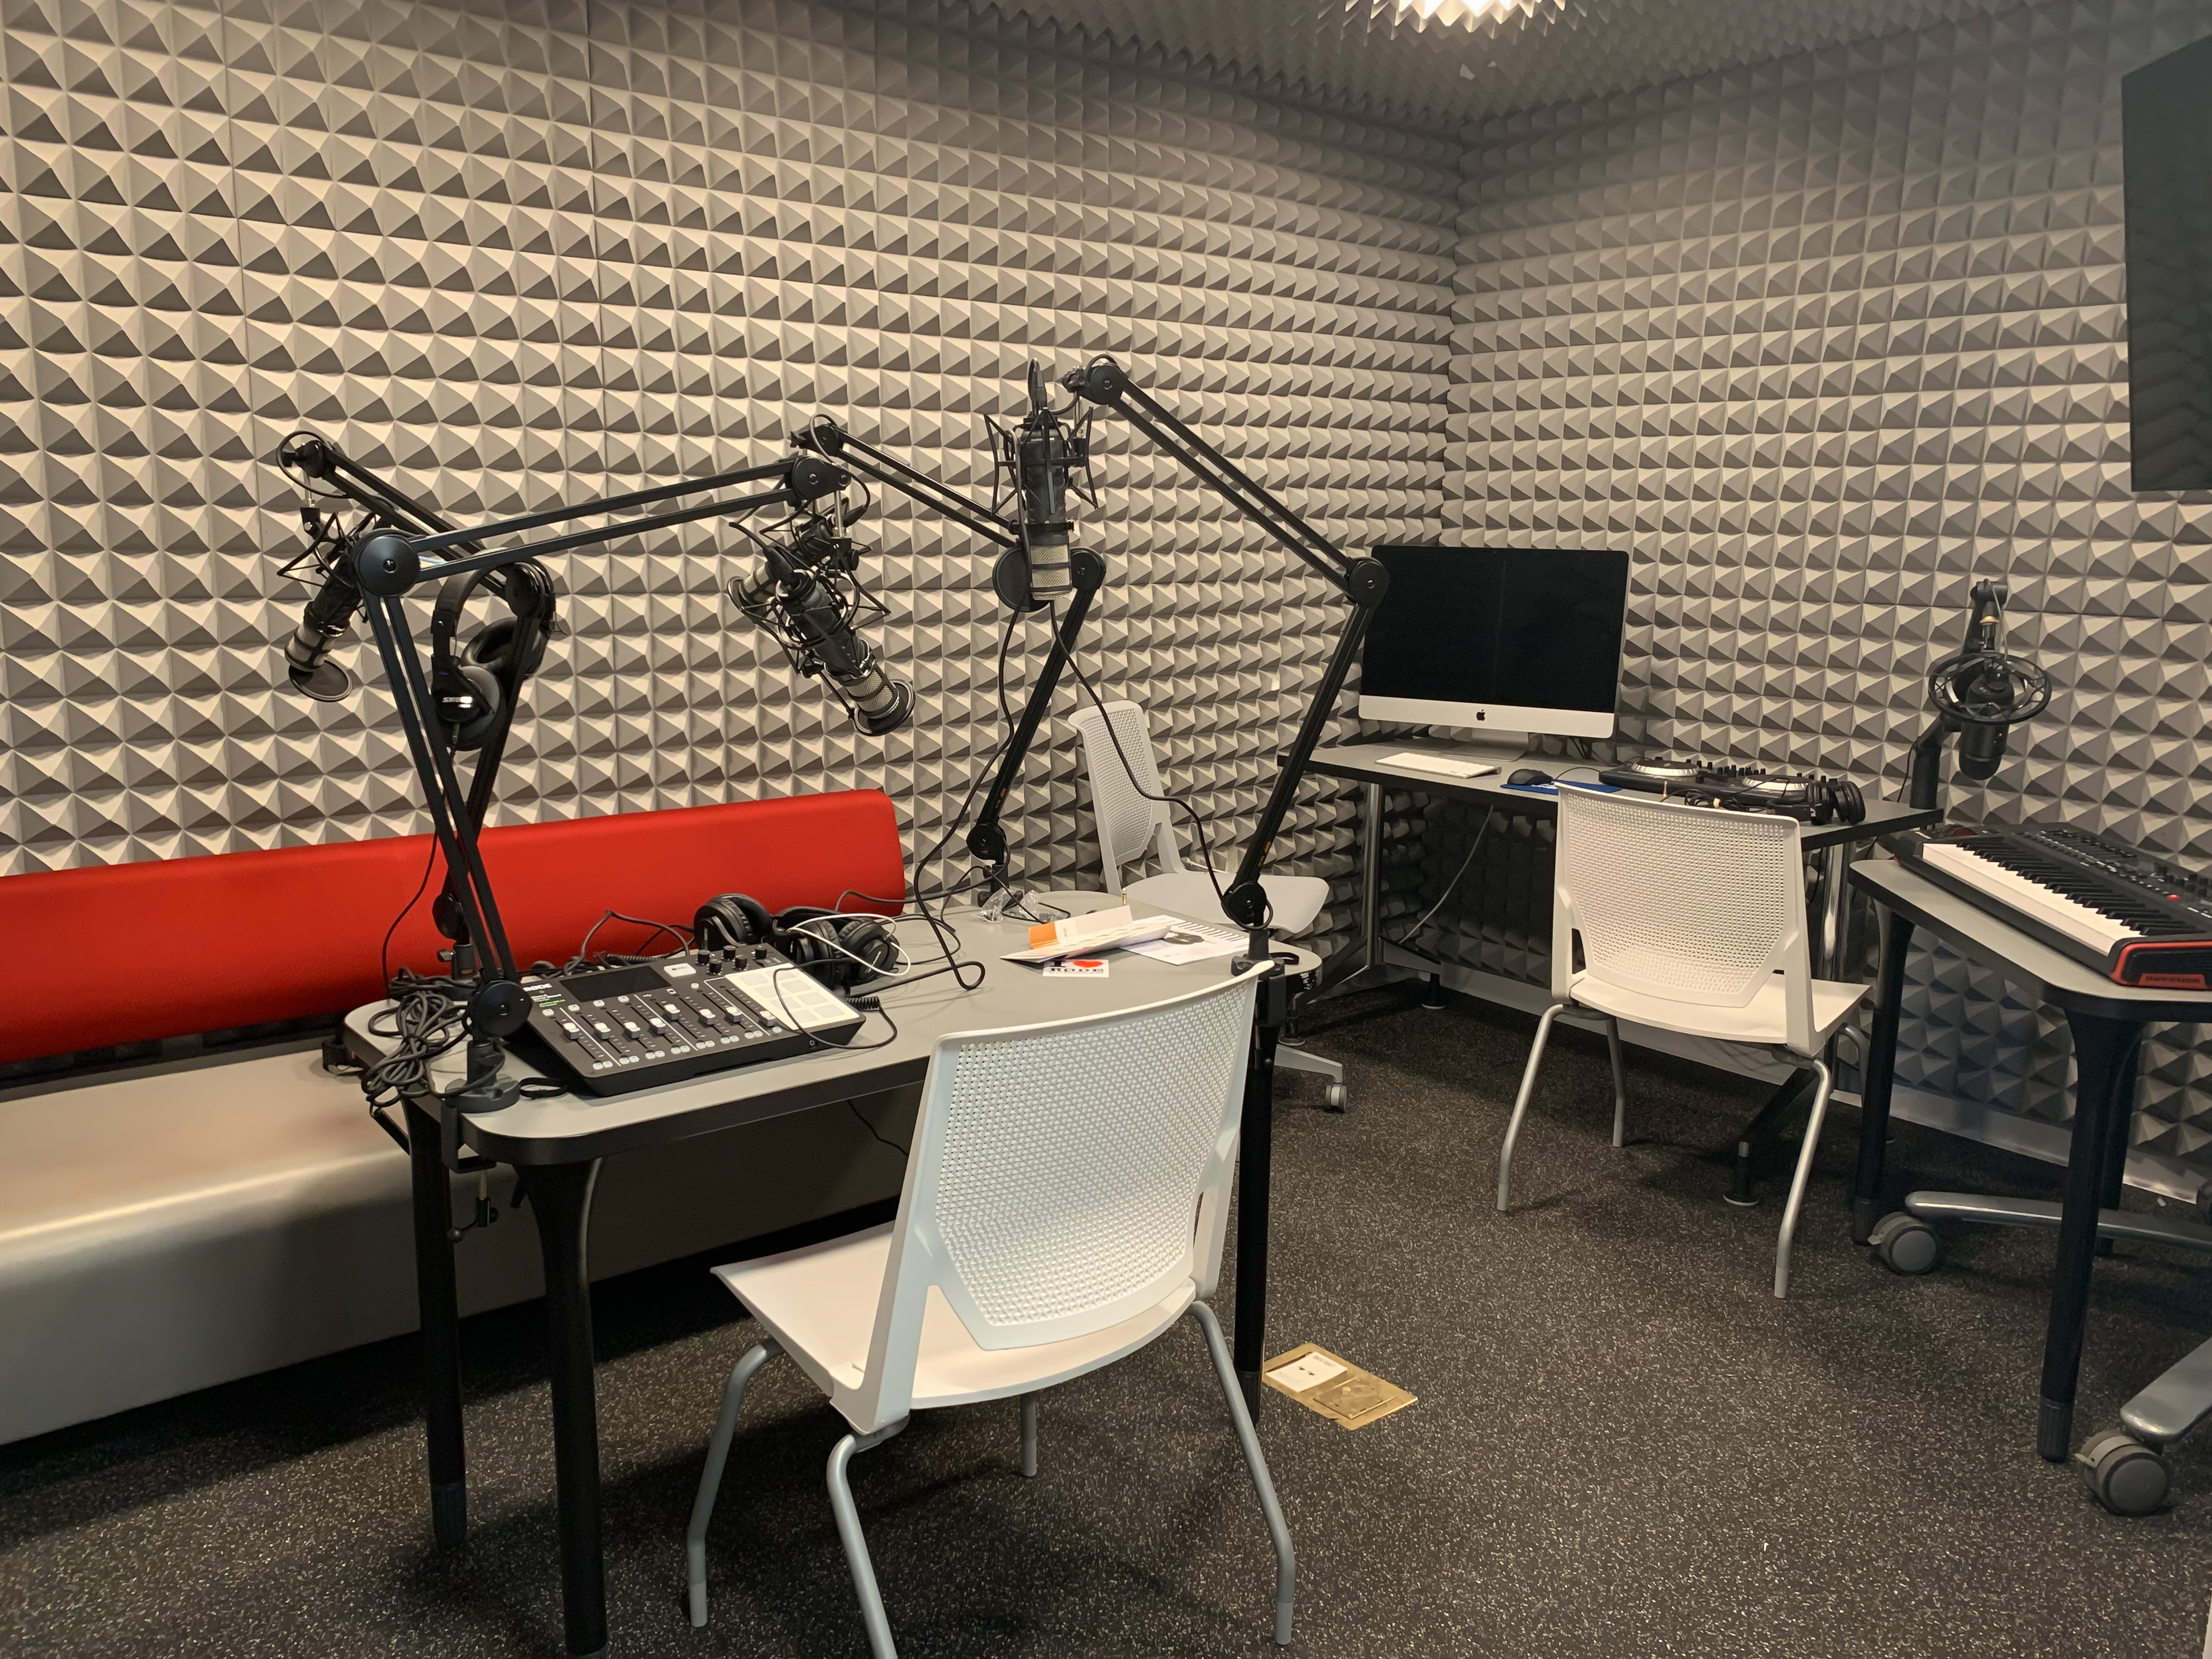 soundproof recording studio with podcast equipment, keyboard, computer